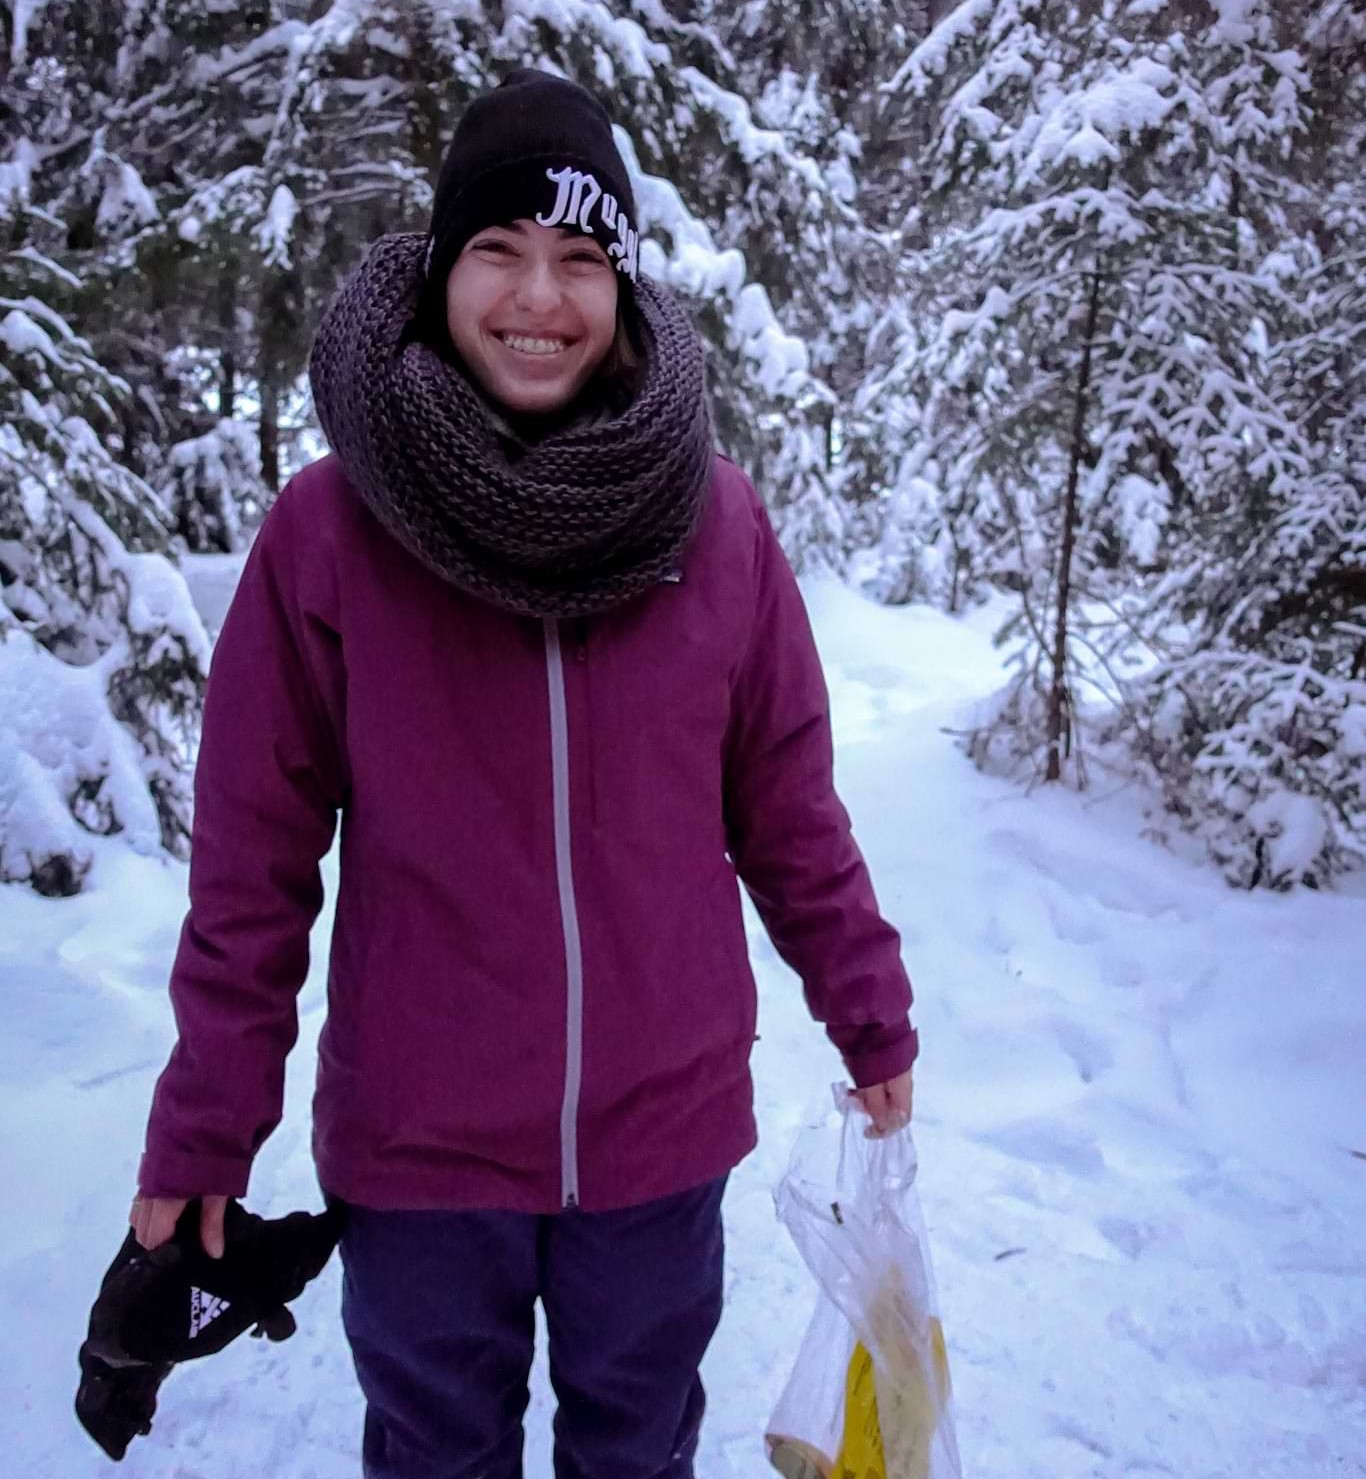 Vanessa being happy while winter camping